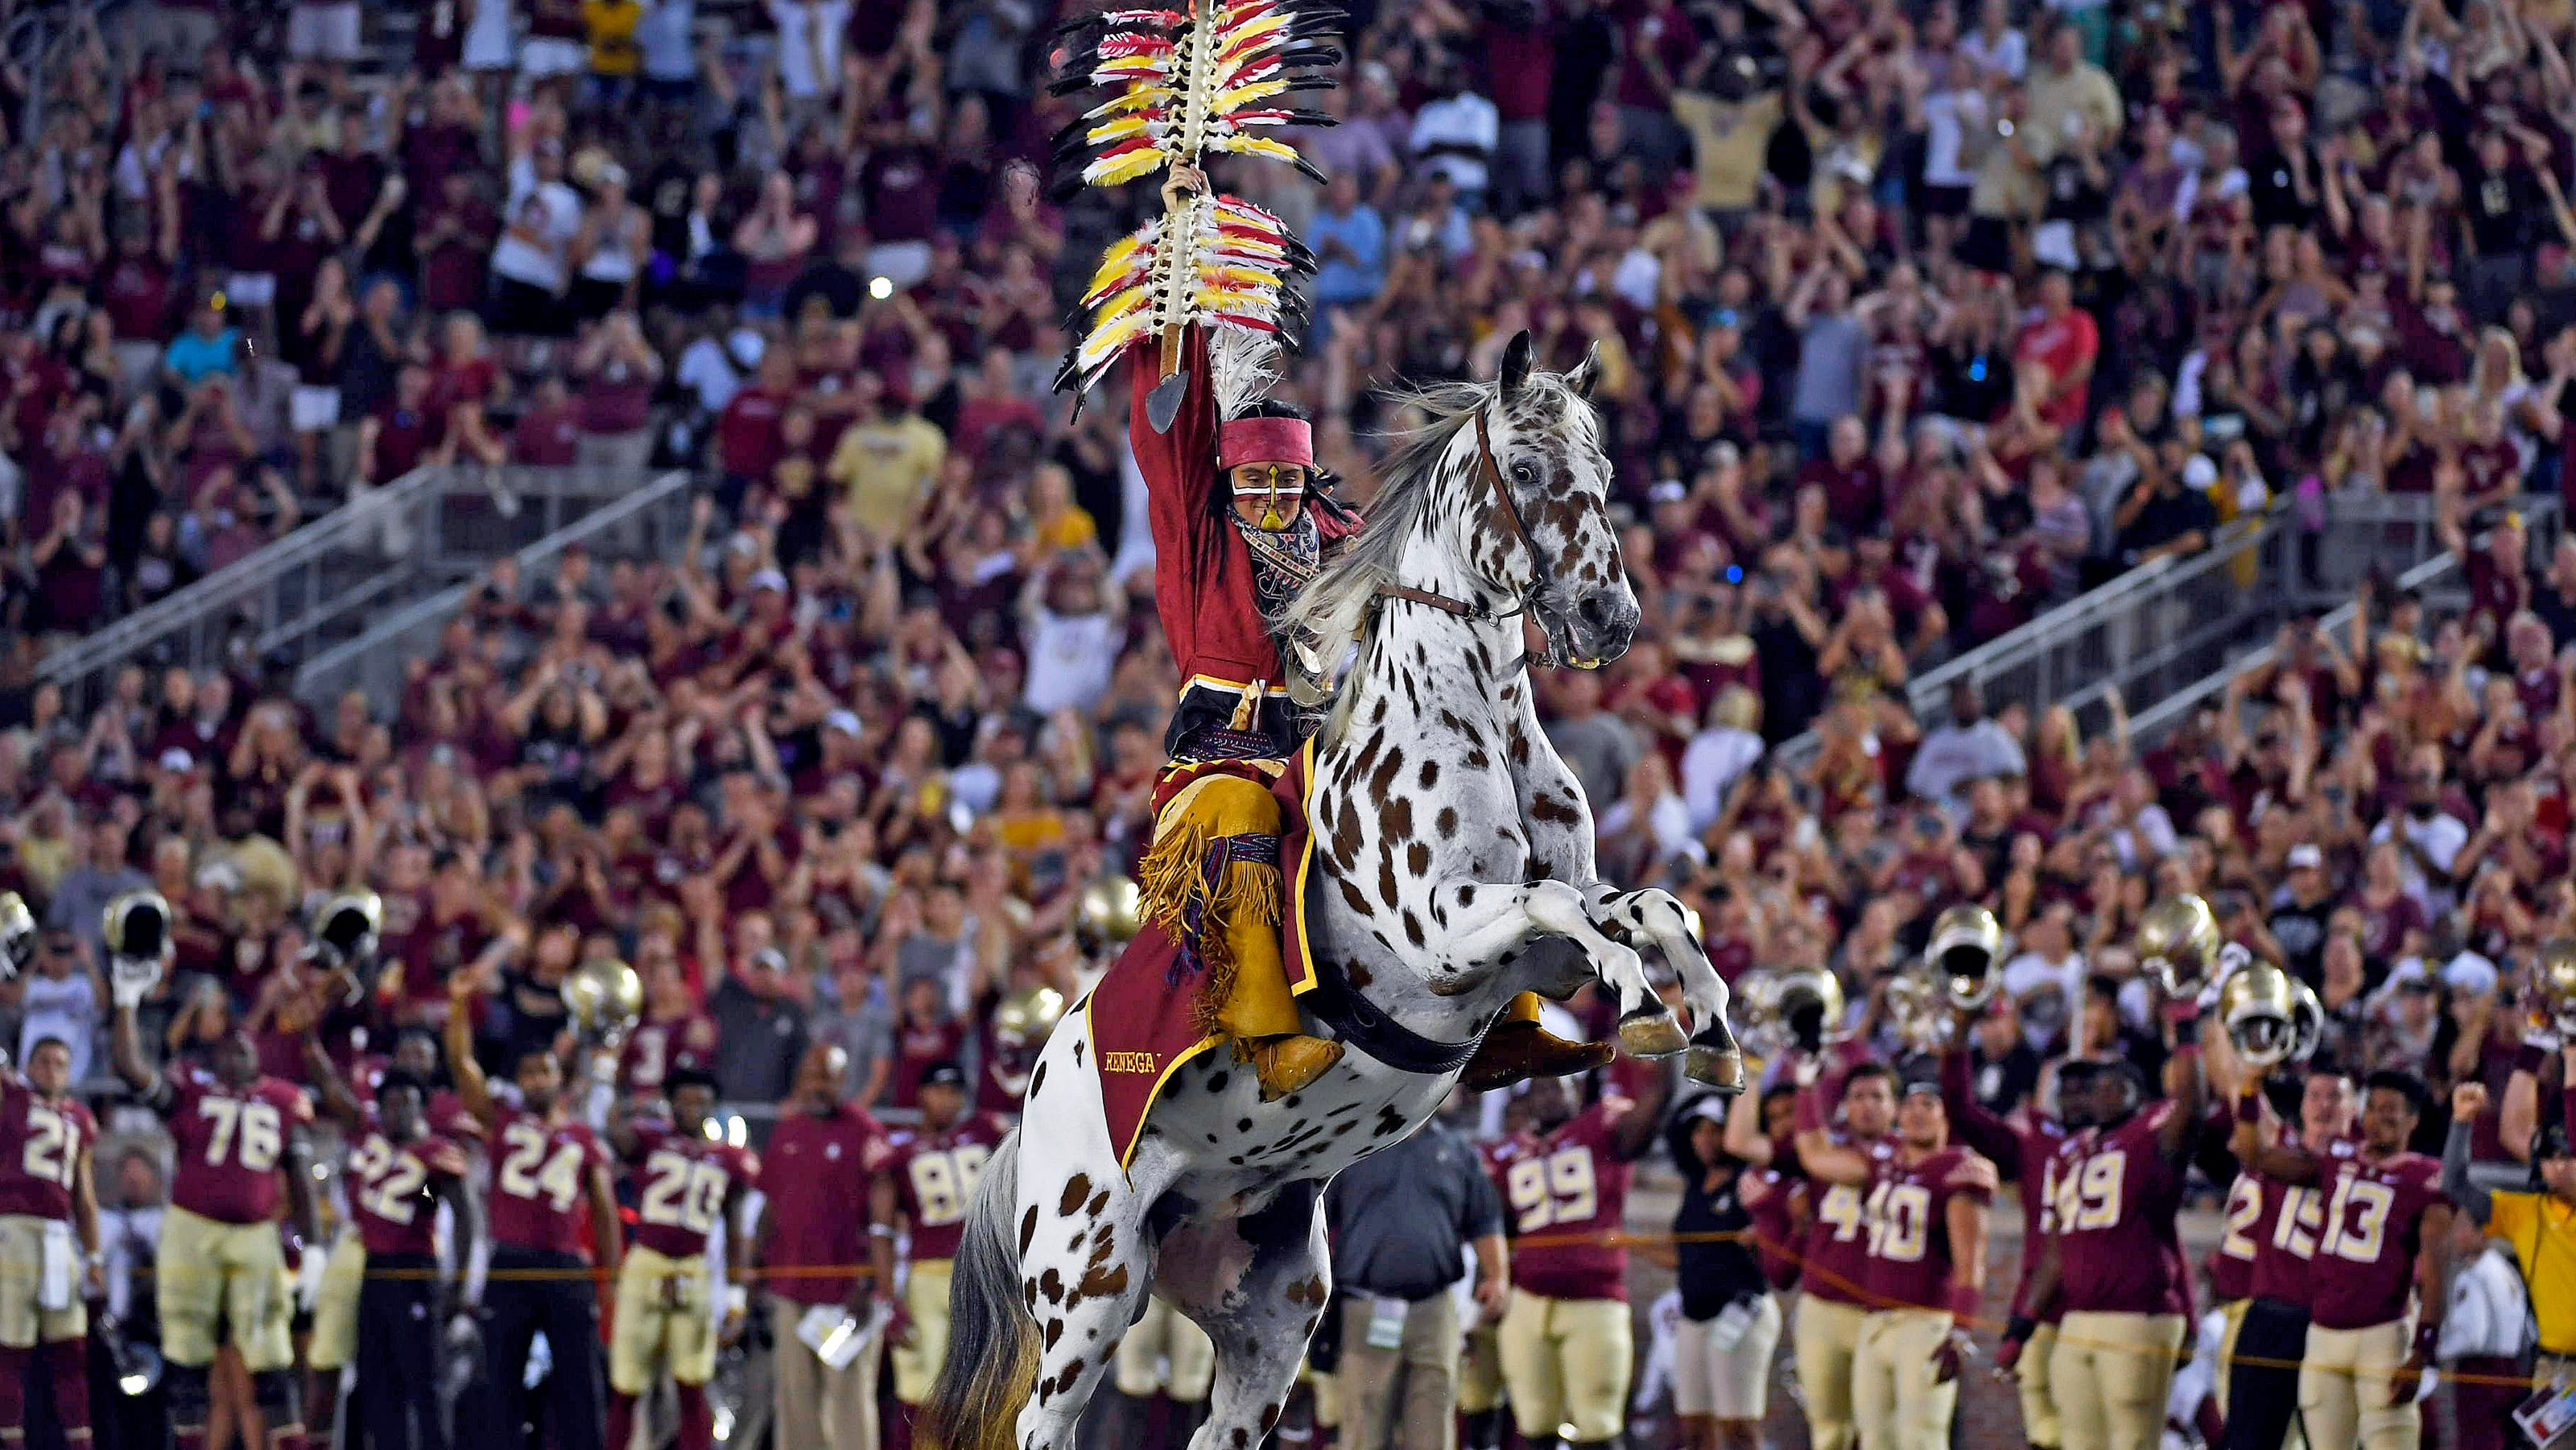 Updated 2020 Florida State football schedule released by ACC